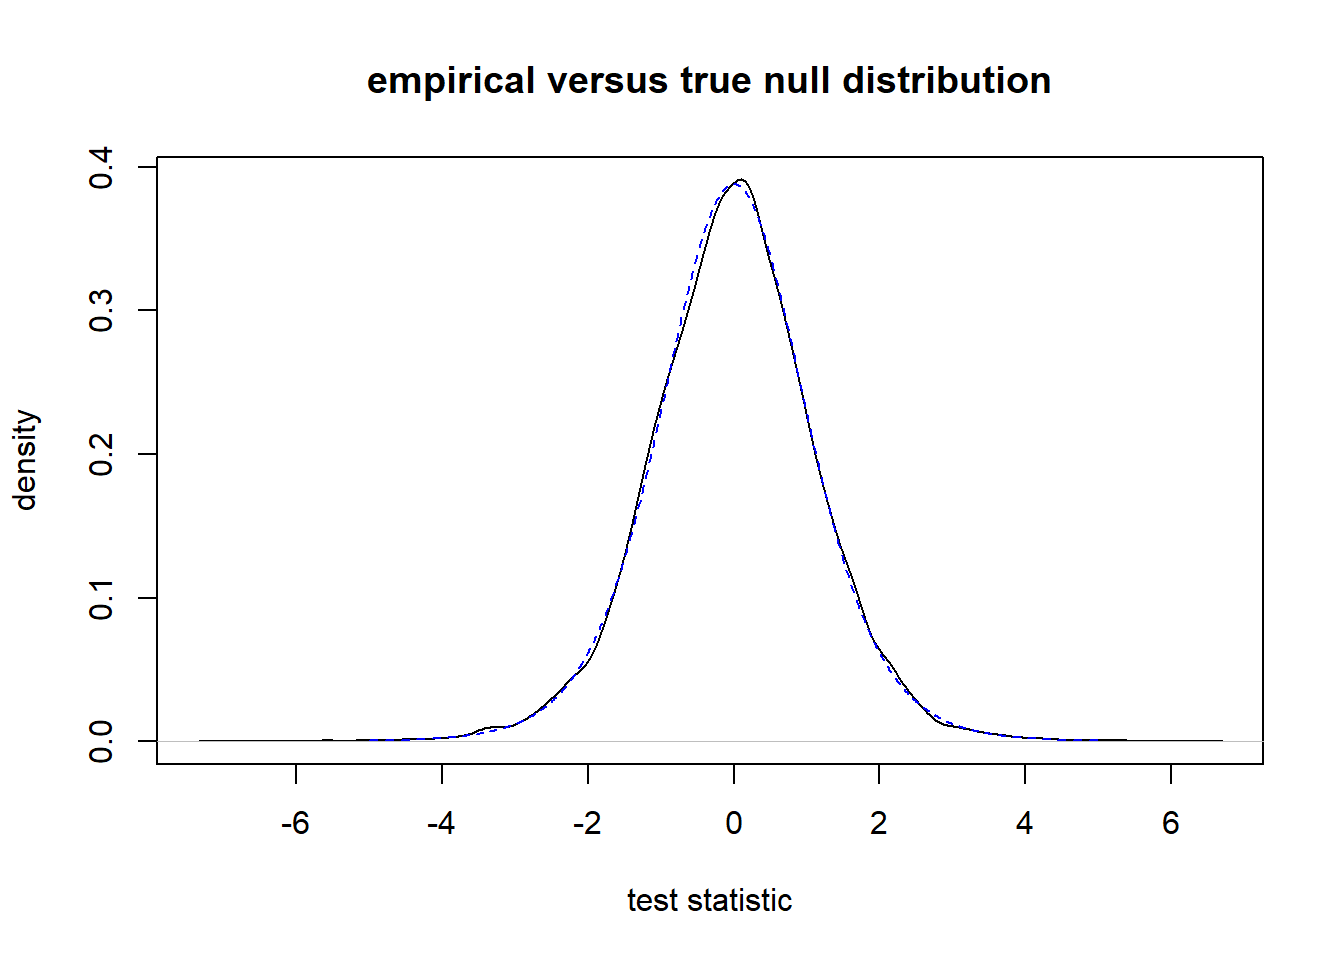 Comparison of empirical null distribution to theoretical null distribution. The empirical null distribution is shown by the solid black line and the theoretical null distribution by a dashed blue line.